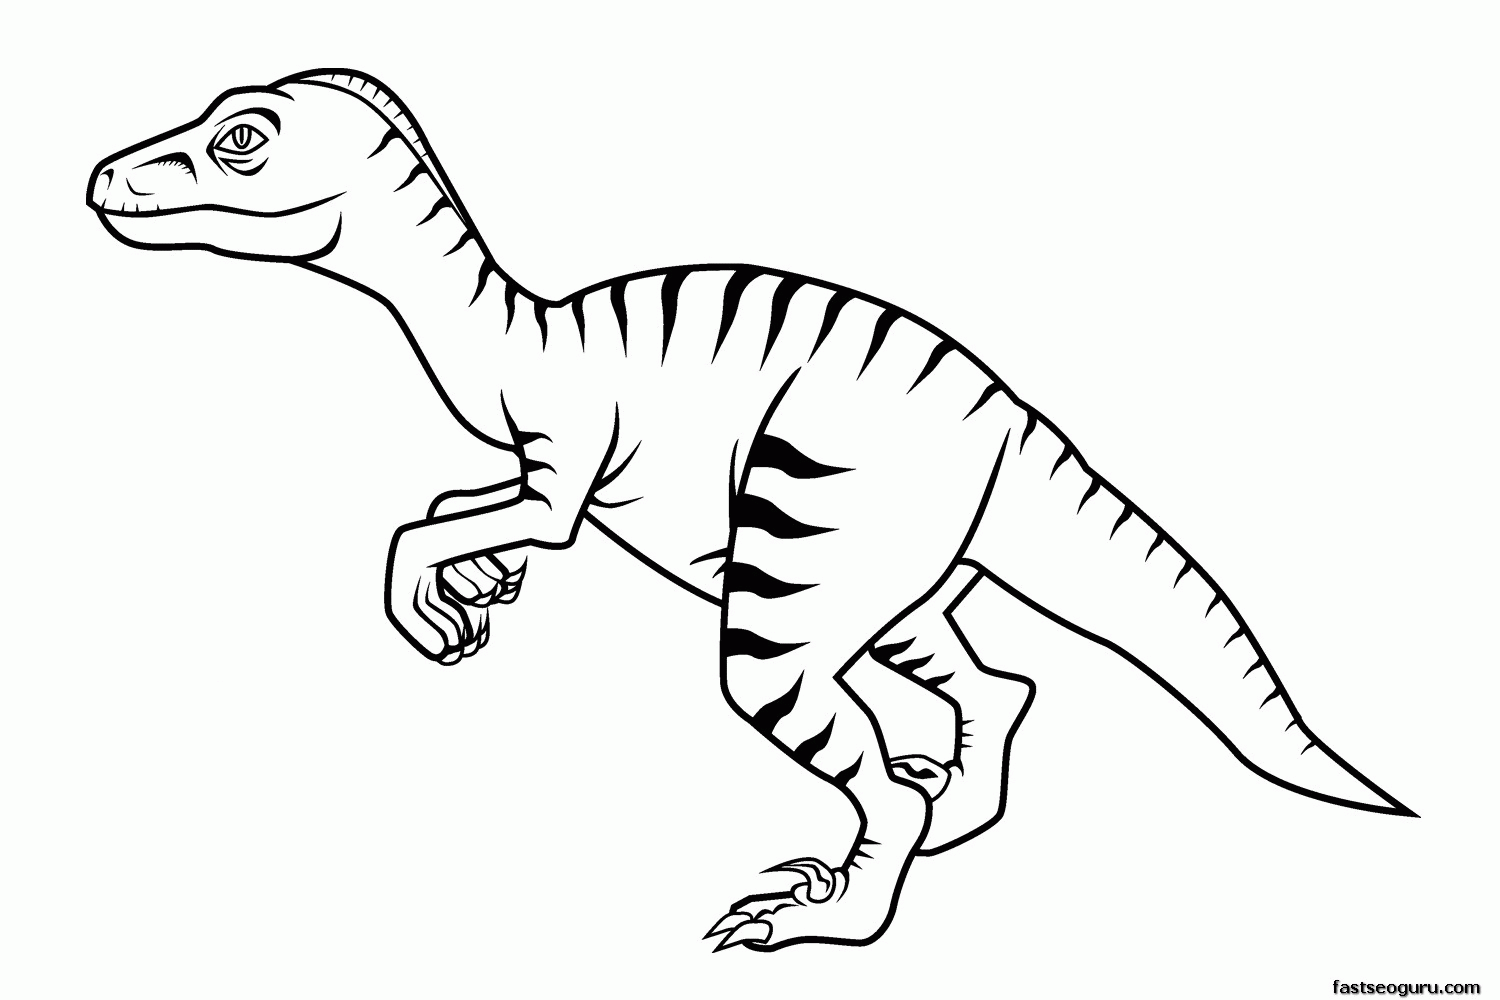 dinosaur-coloring-pages-for-kids-coloringpages234